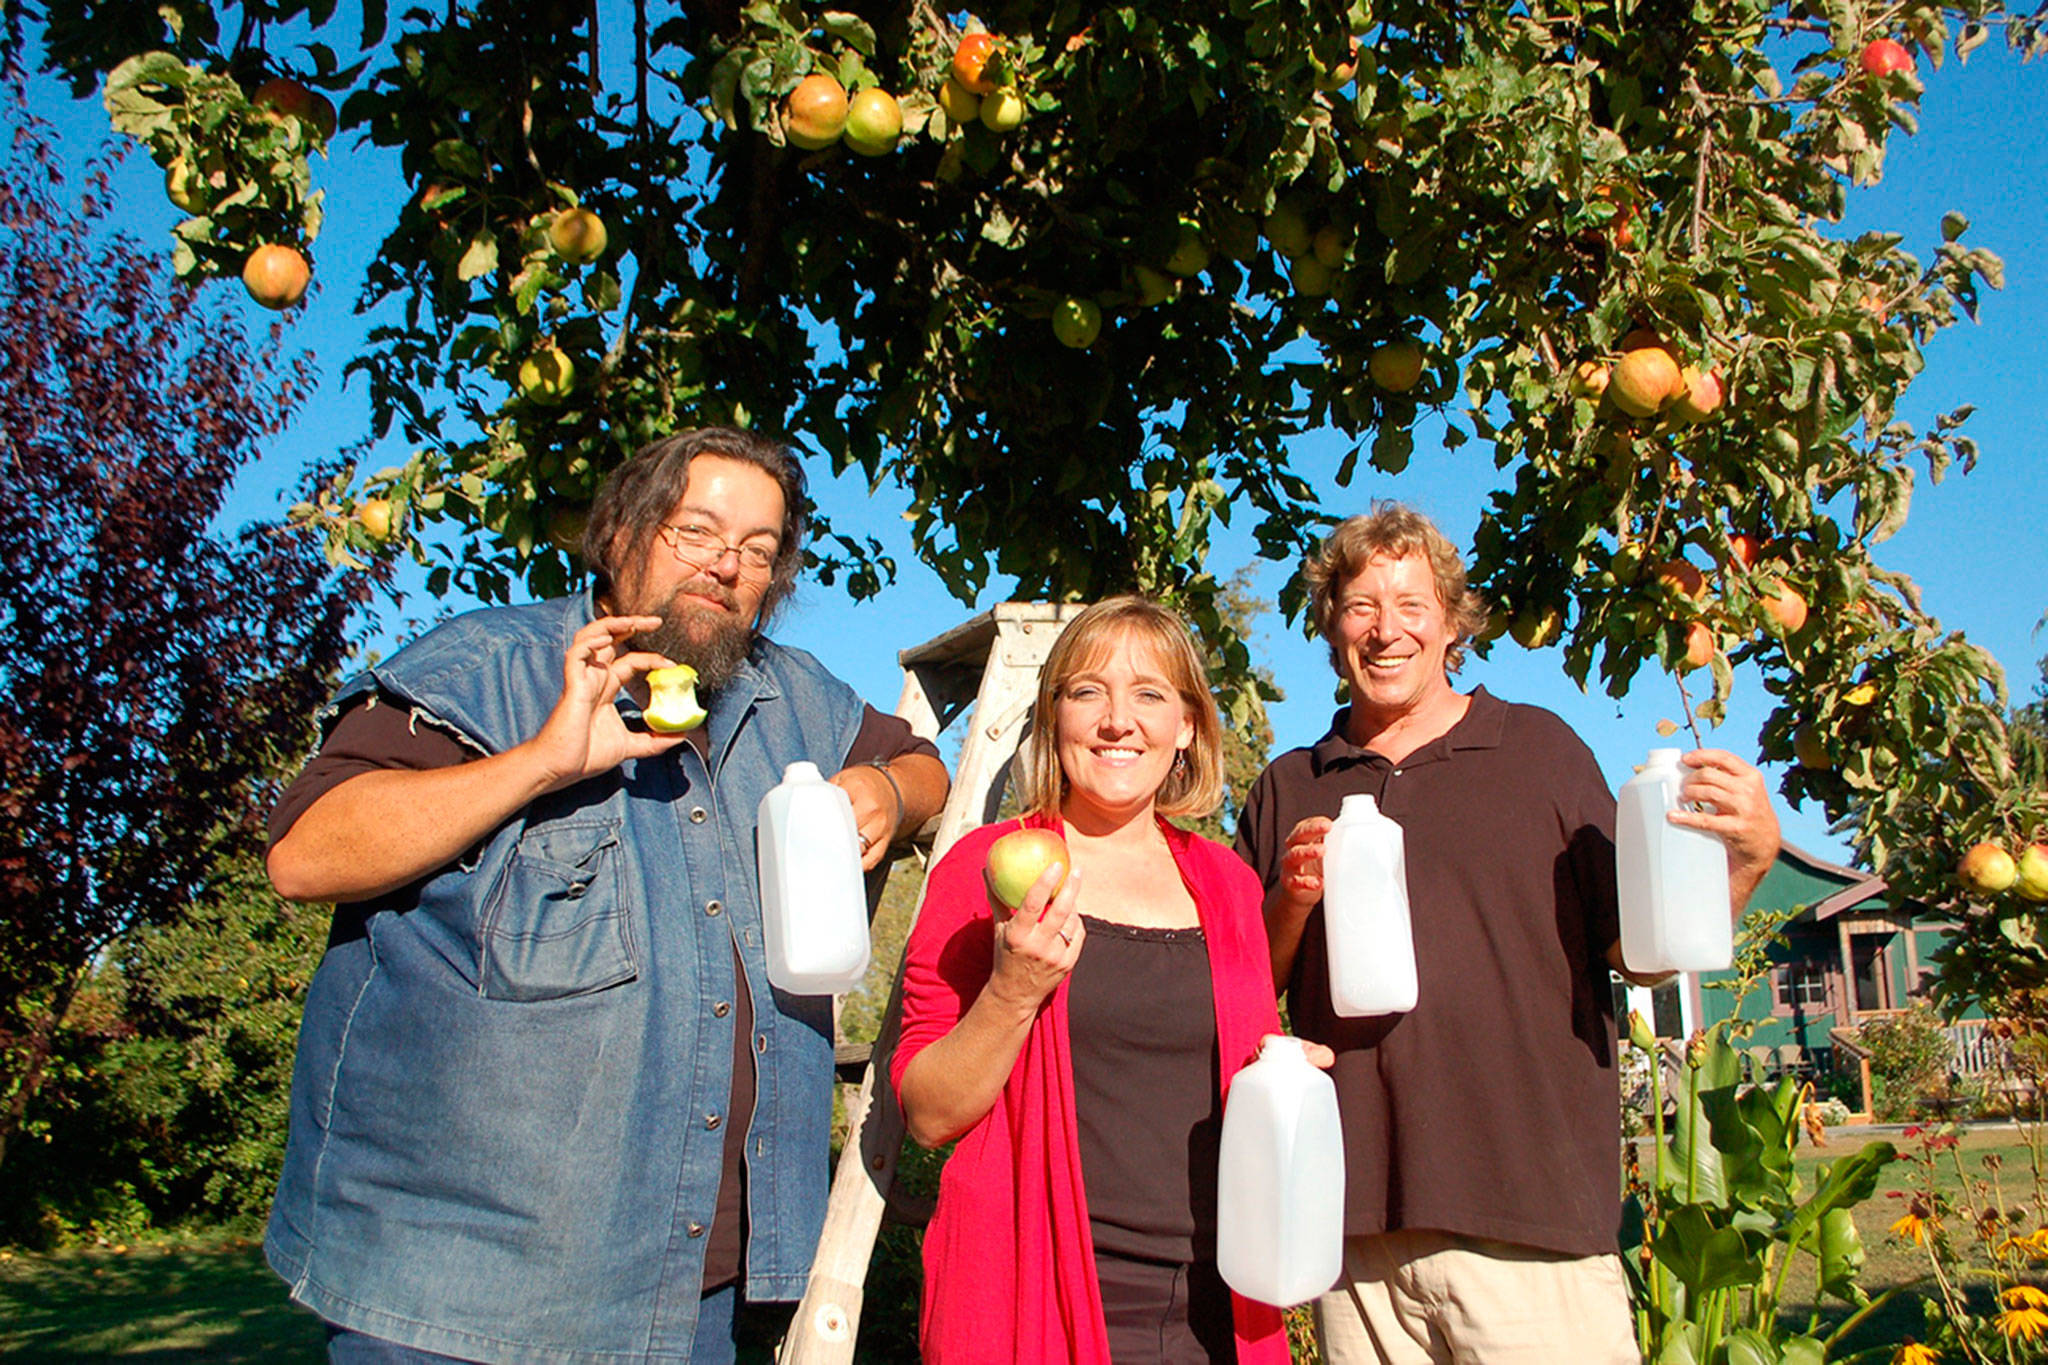 Coordinators of the eighth annual Apple Stock benefit, Jonathan Simonson, Kelly Sanders and Mark Schwartz prepare to press organic apples into cider from Oct. 6 through Oct. 8. The three-day event features music, cider pressing and concessions with donations going toward local causes. Sequim Gazette photo by Erin Hawkins